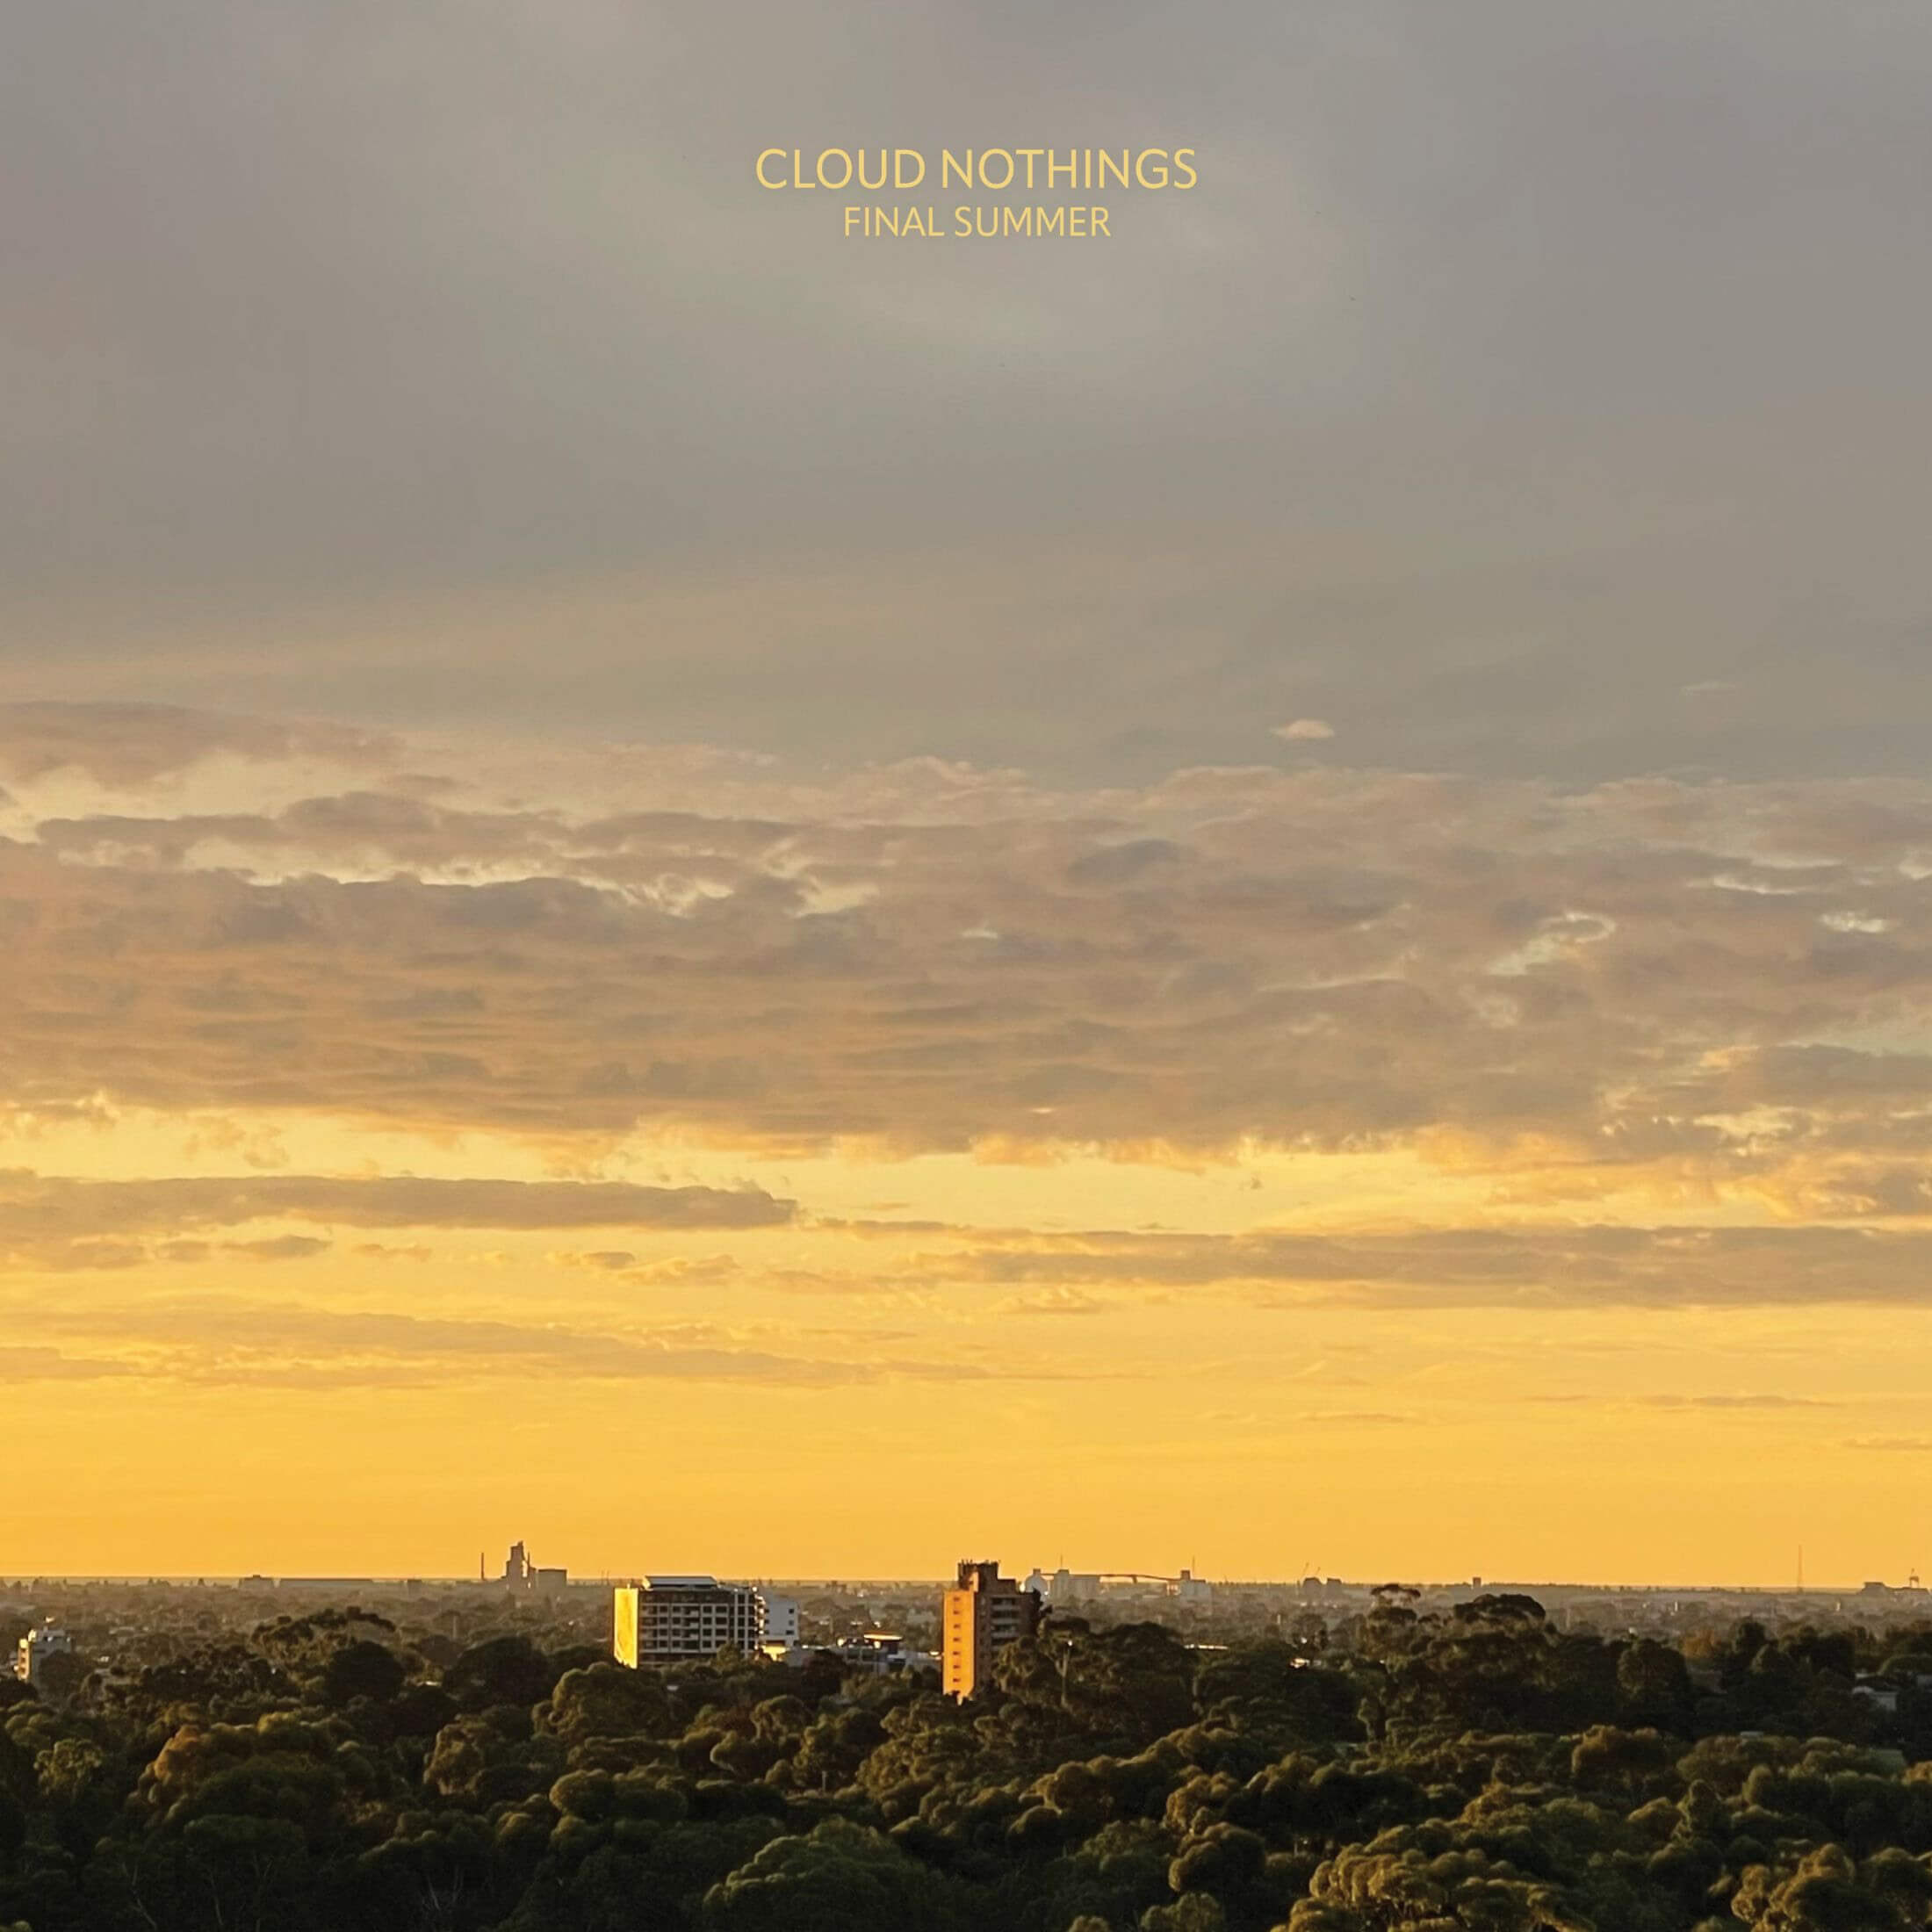 Final Summer by Cloud Nothings album review by Ben Lock for Northern Transmissions. The band's full-length drops on April 19th via Pure Noise